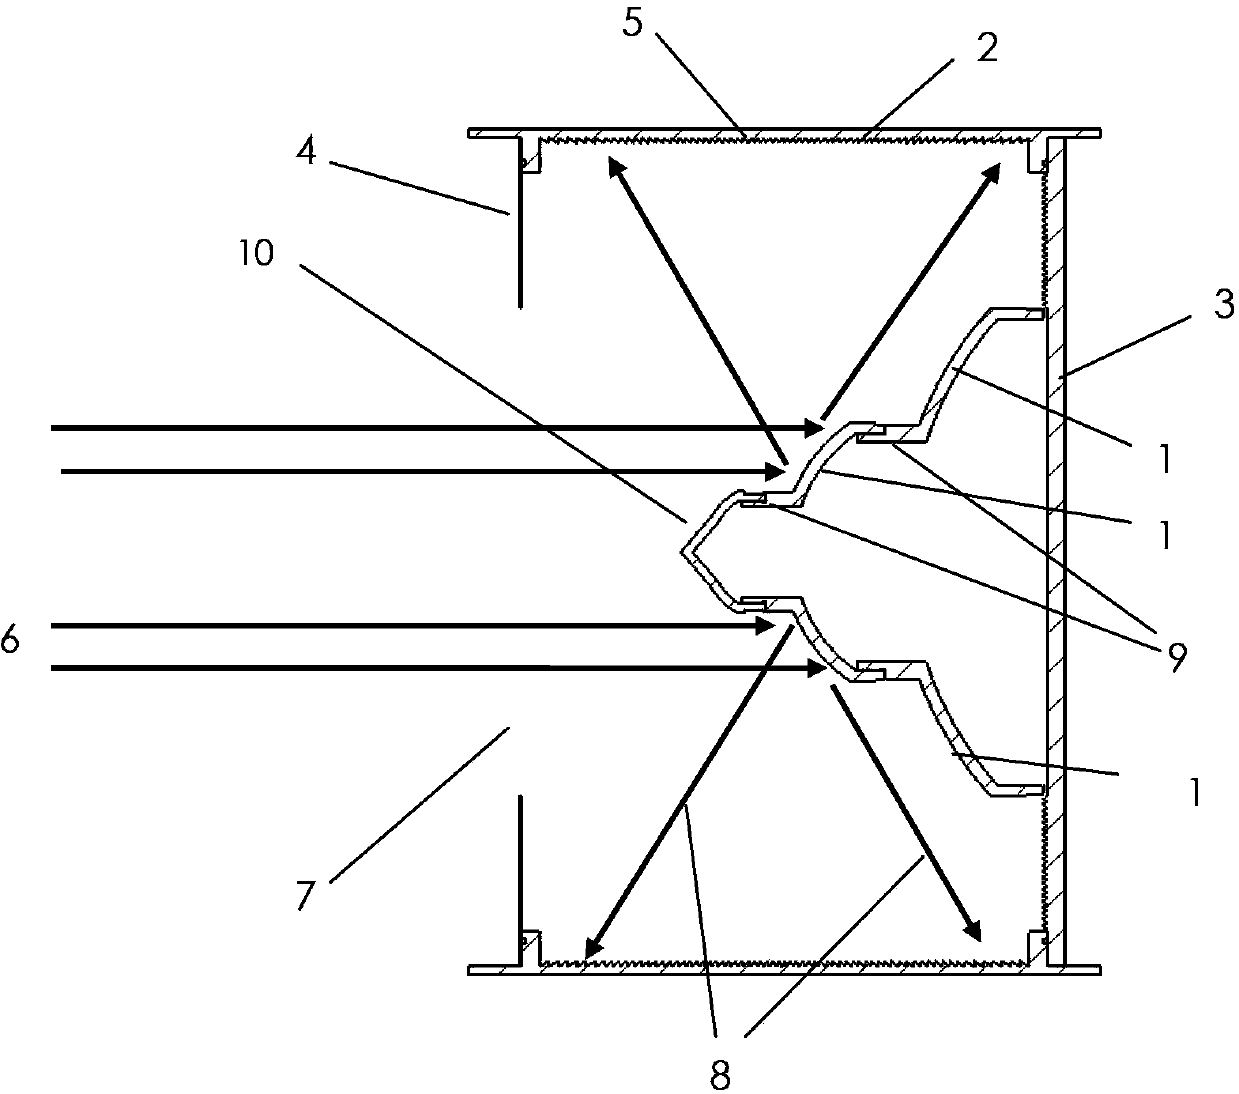 High-energy laser beam expanding and absorbing device